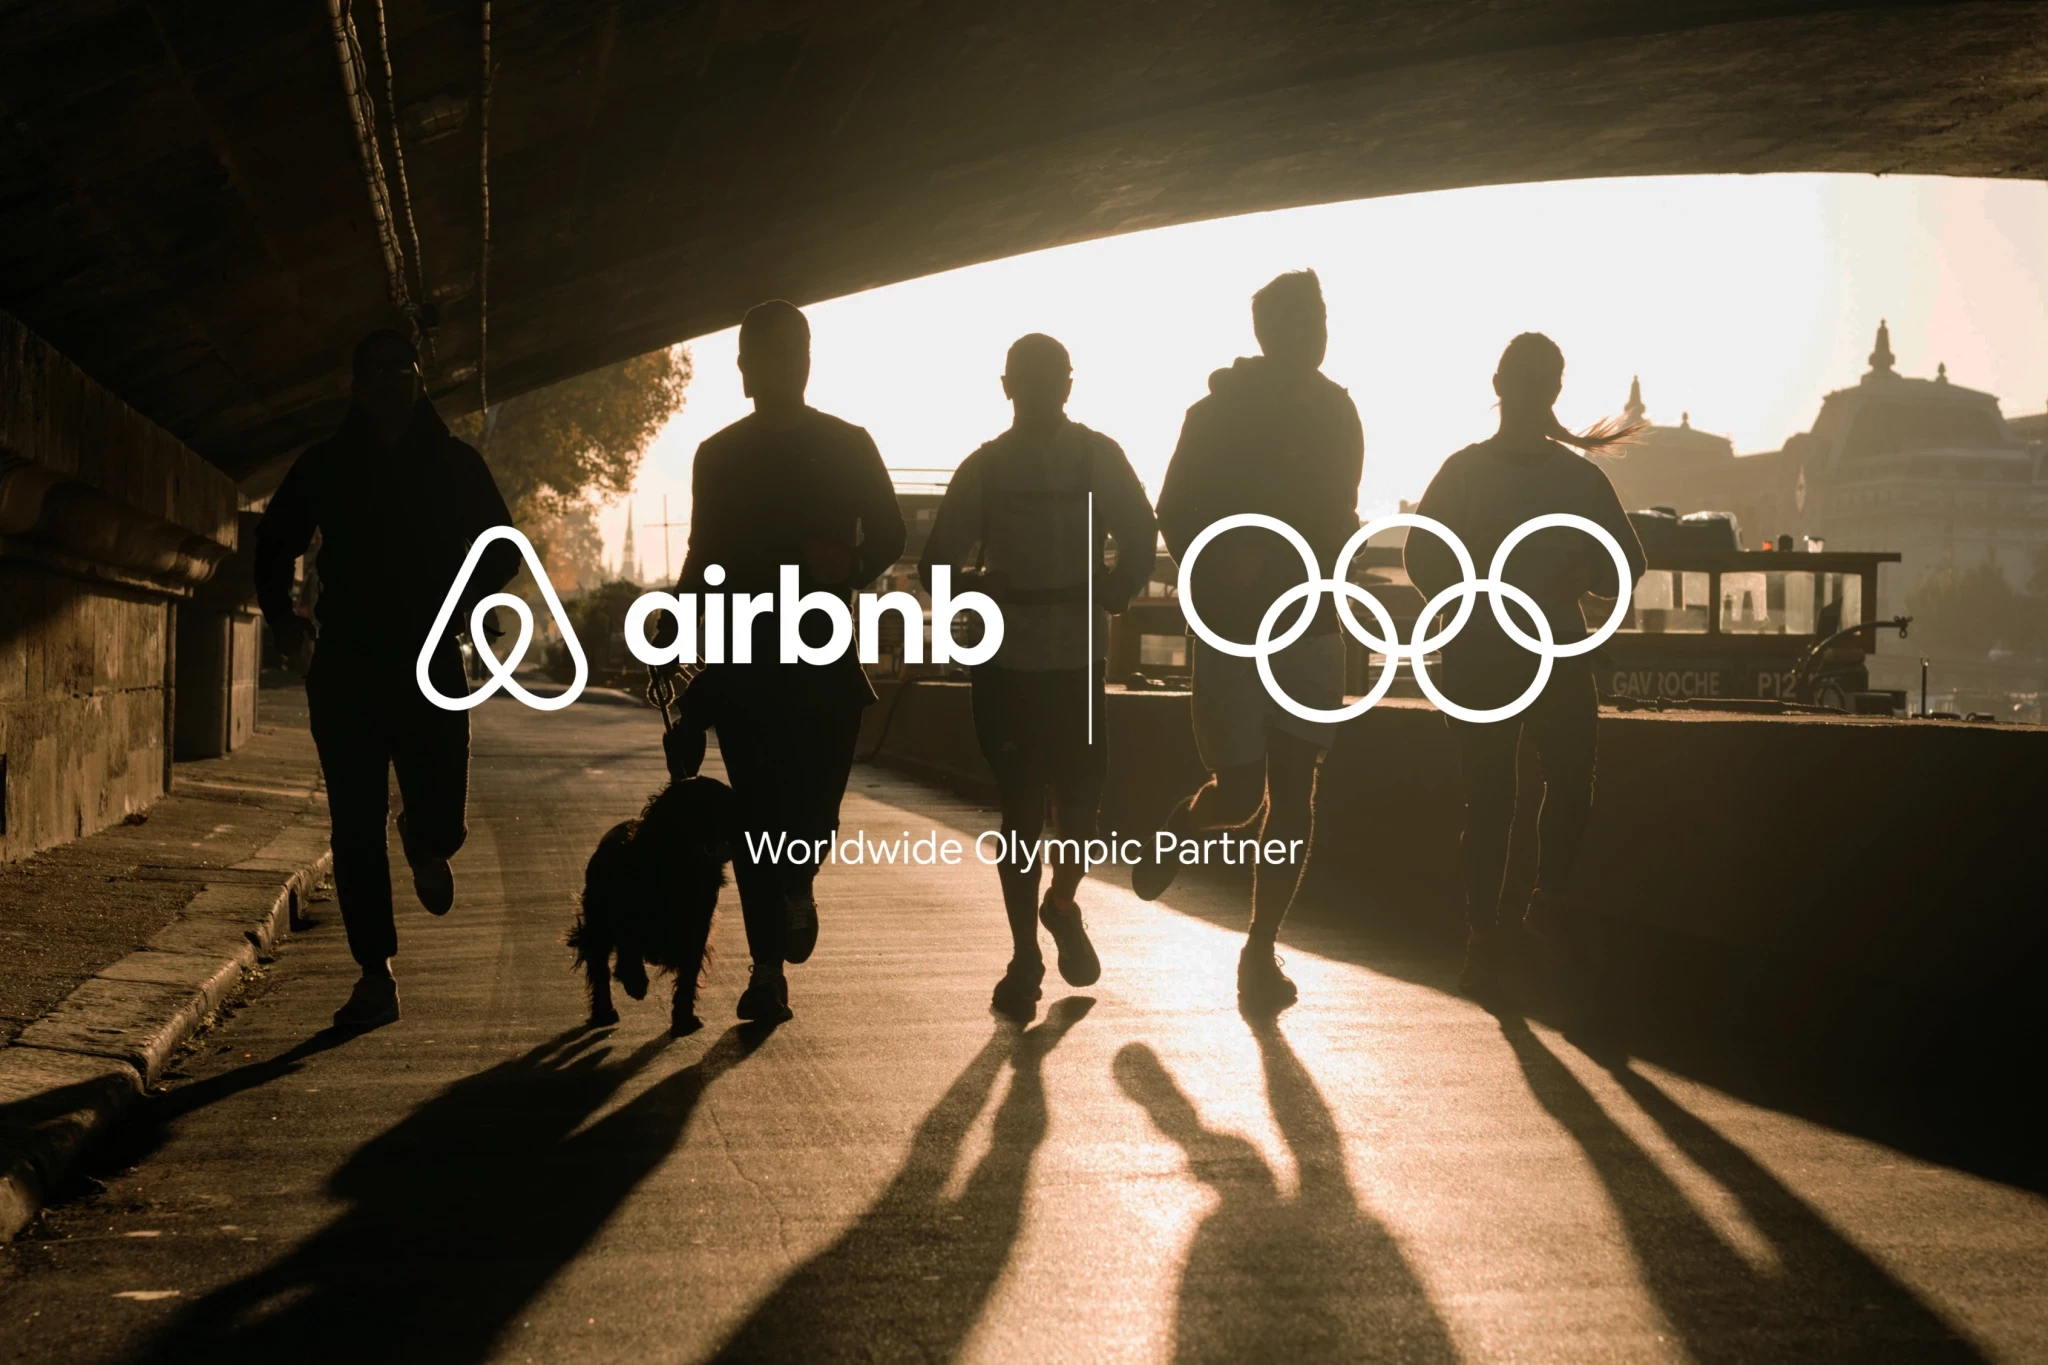 Searches for Paris 2024 accommodation skyrocket on Olympic sponsor website Airbnb